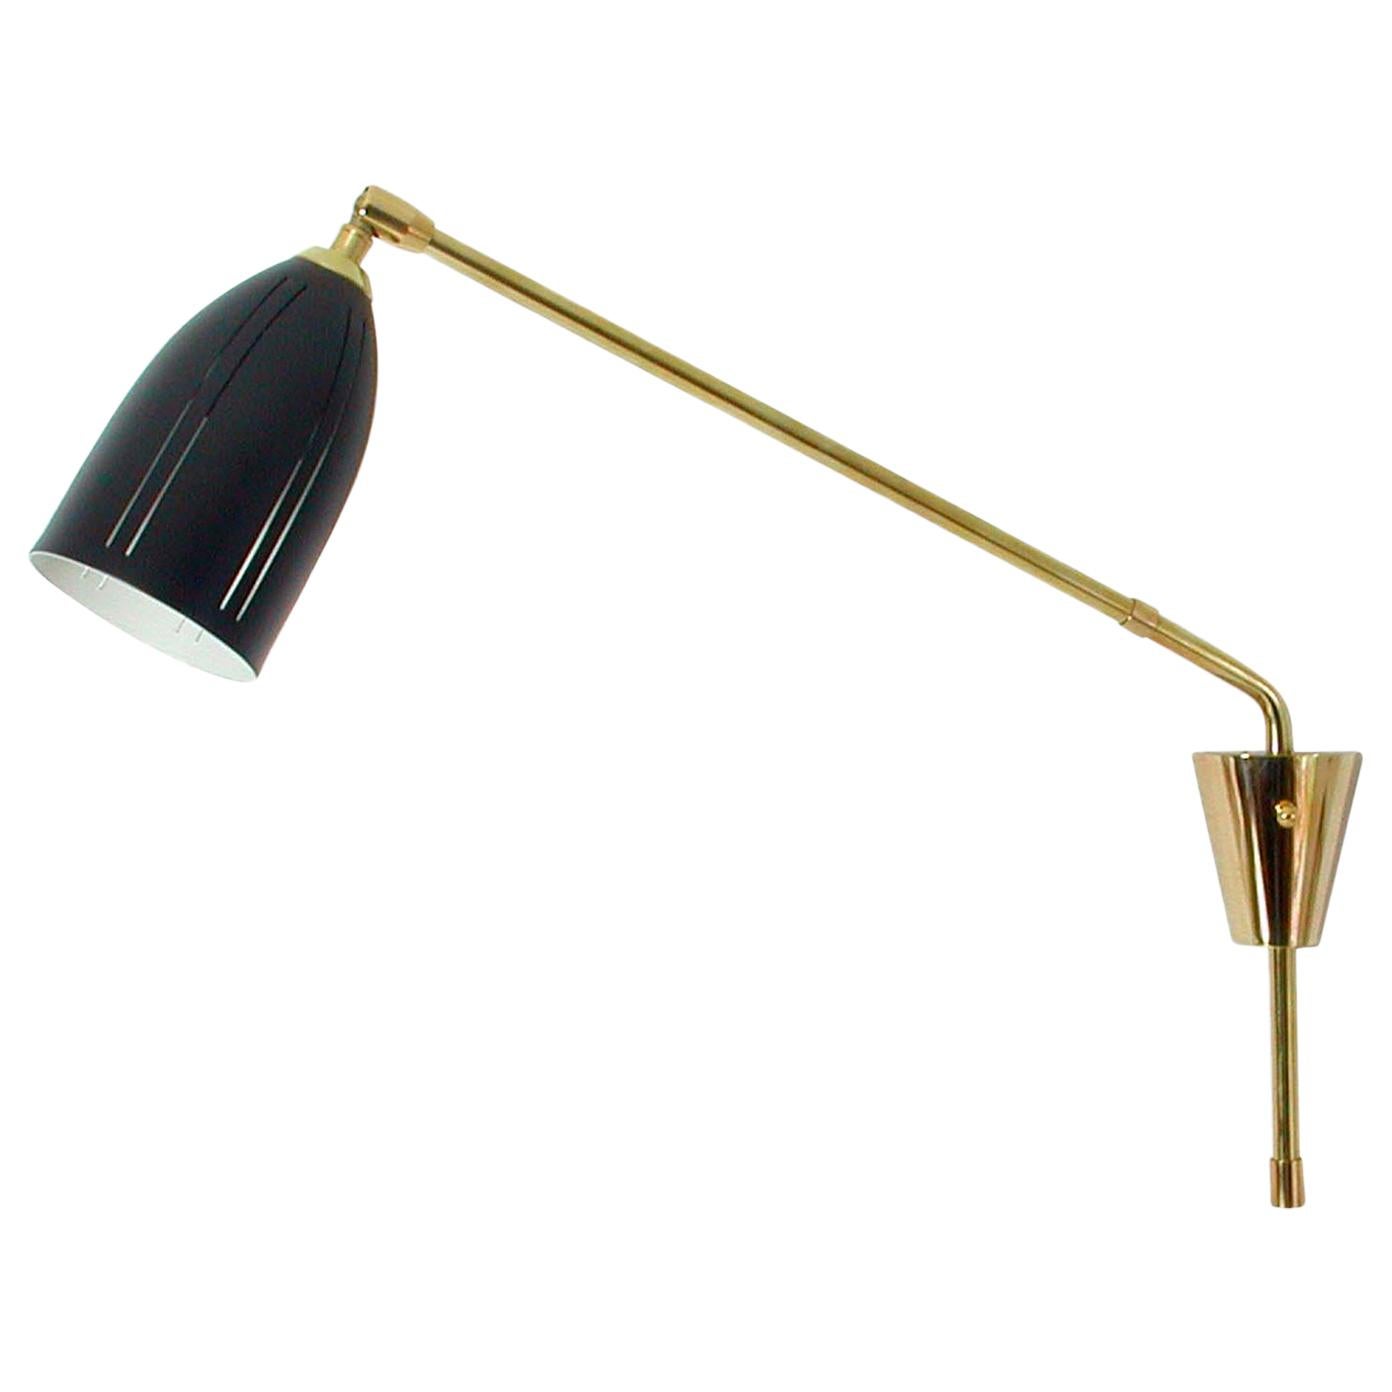 French Articulating "Potence" Wall Light Sconce, 1950s